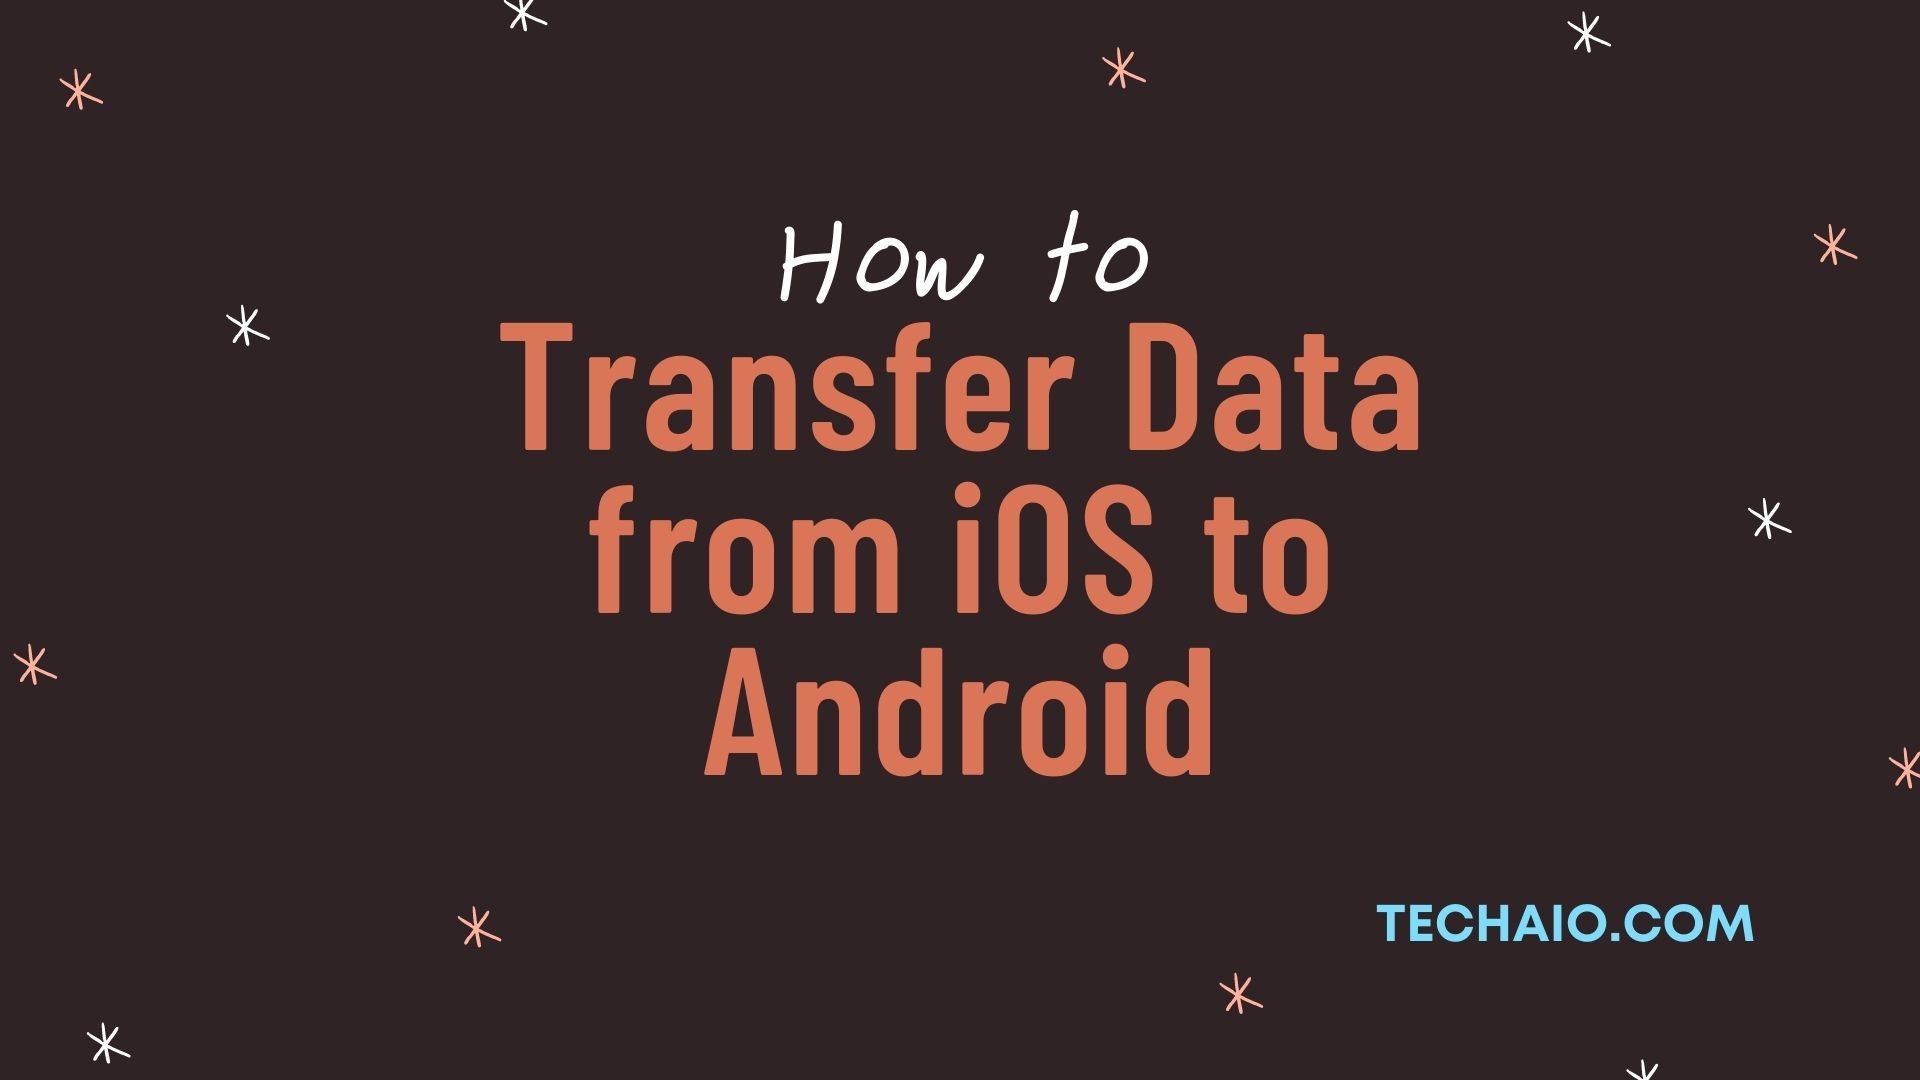 How to transfer data from iOS to Android